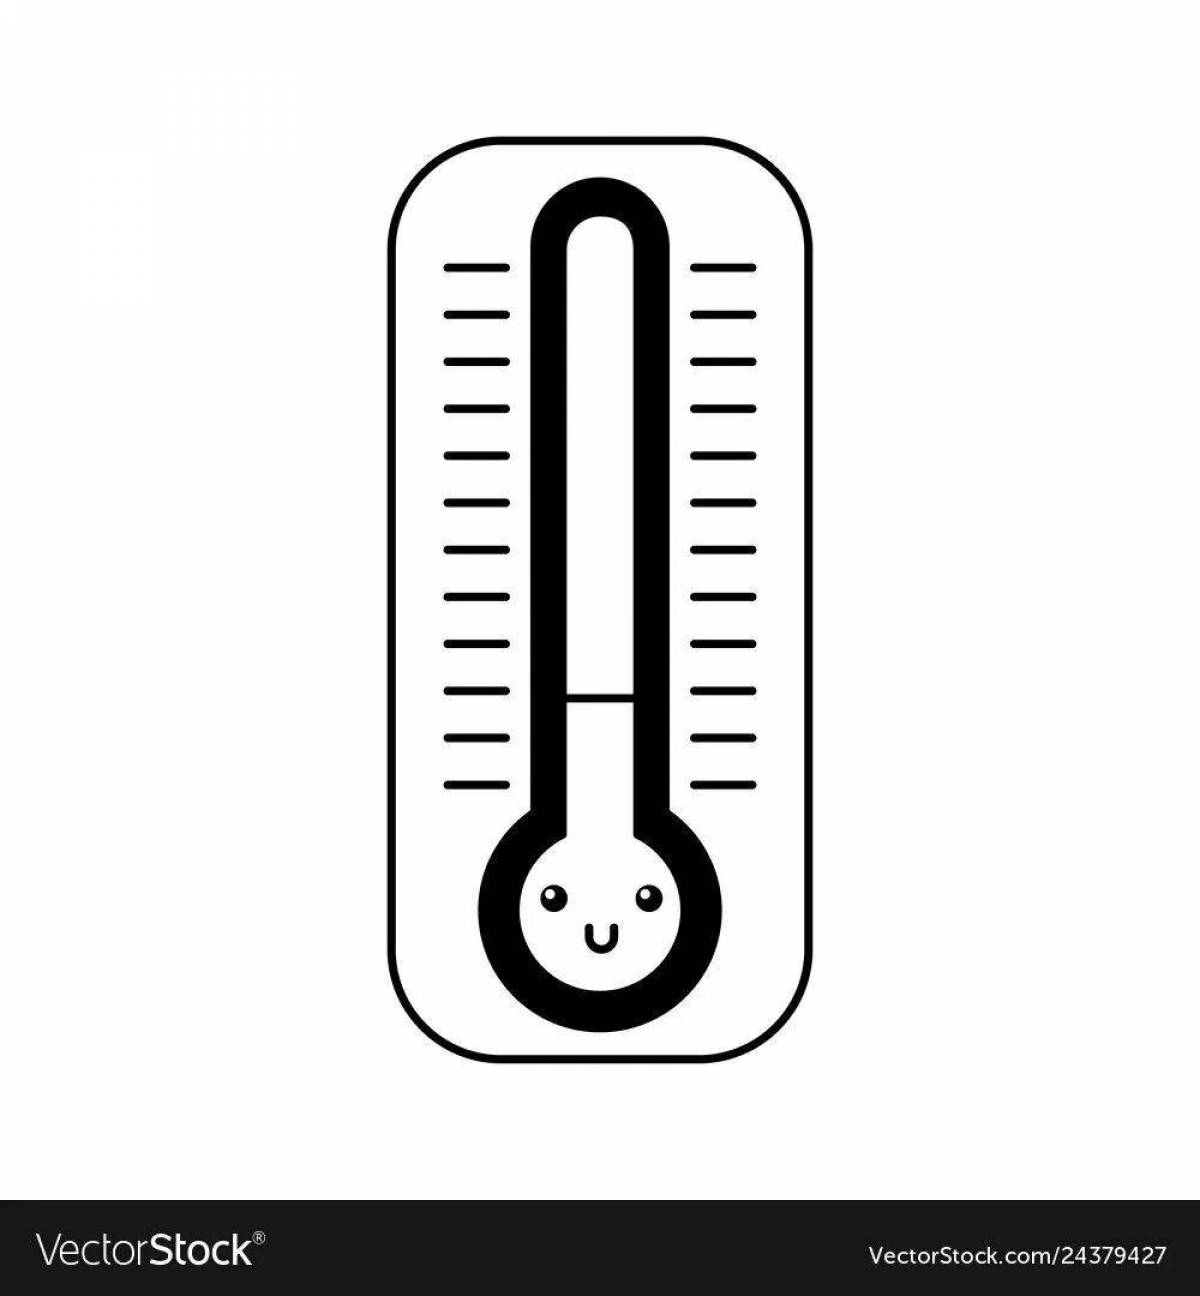 Colorful thermometer coloring page for kids for all tastes